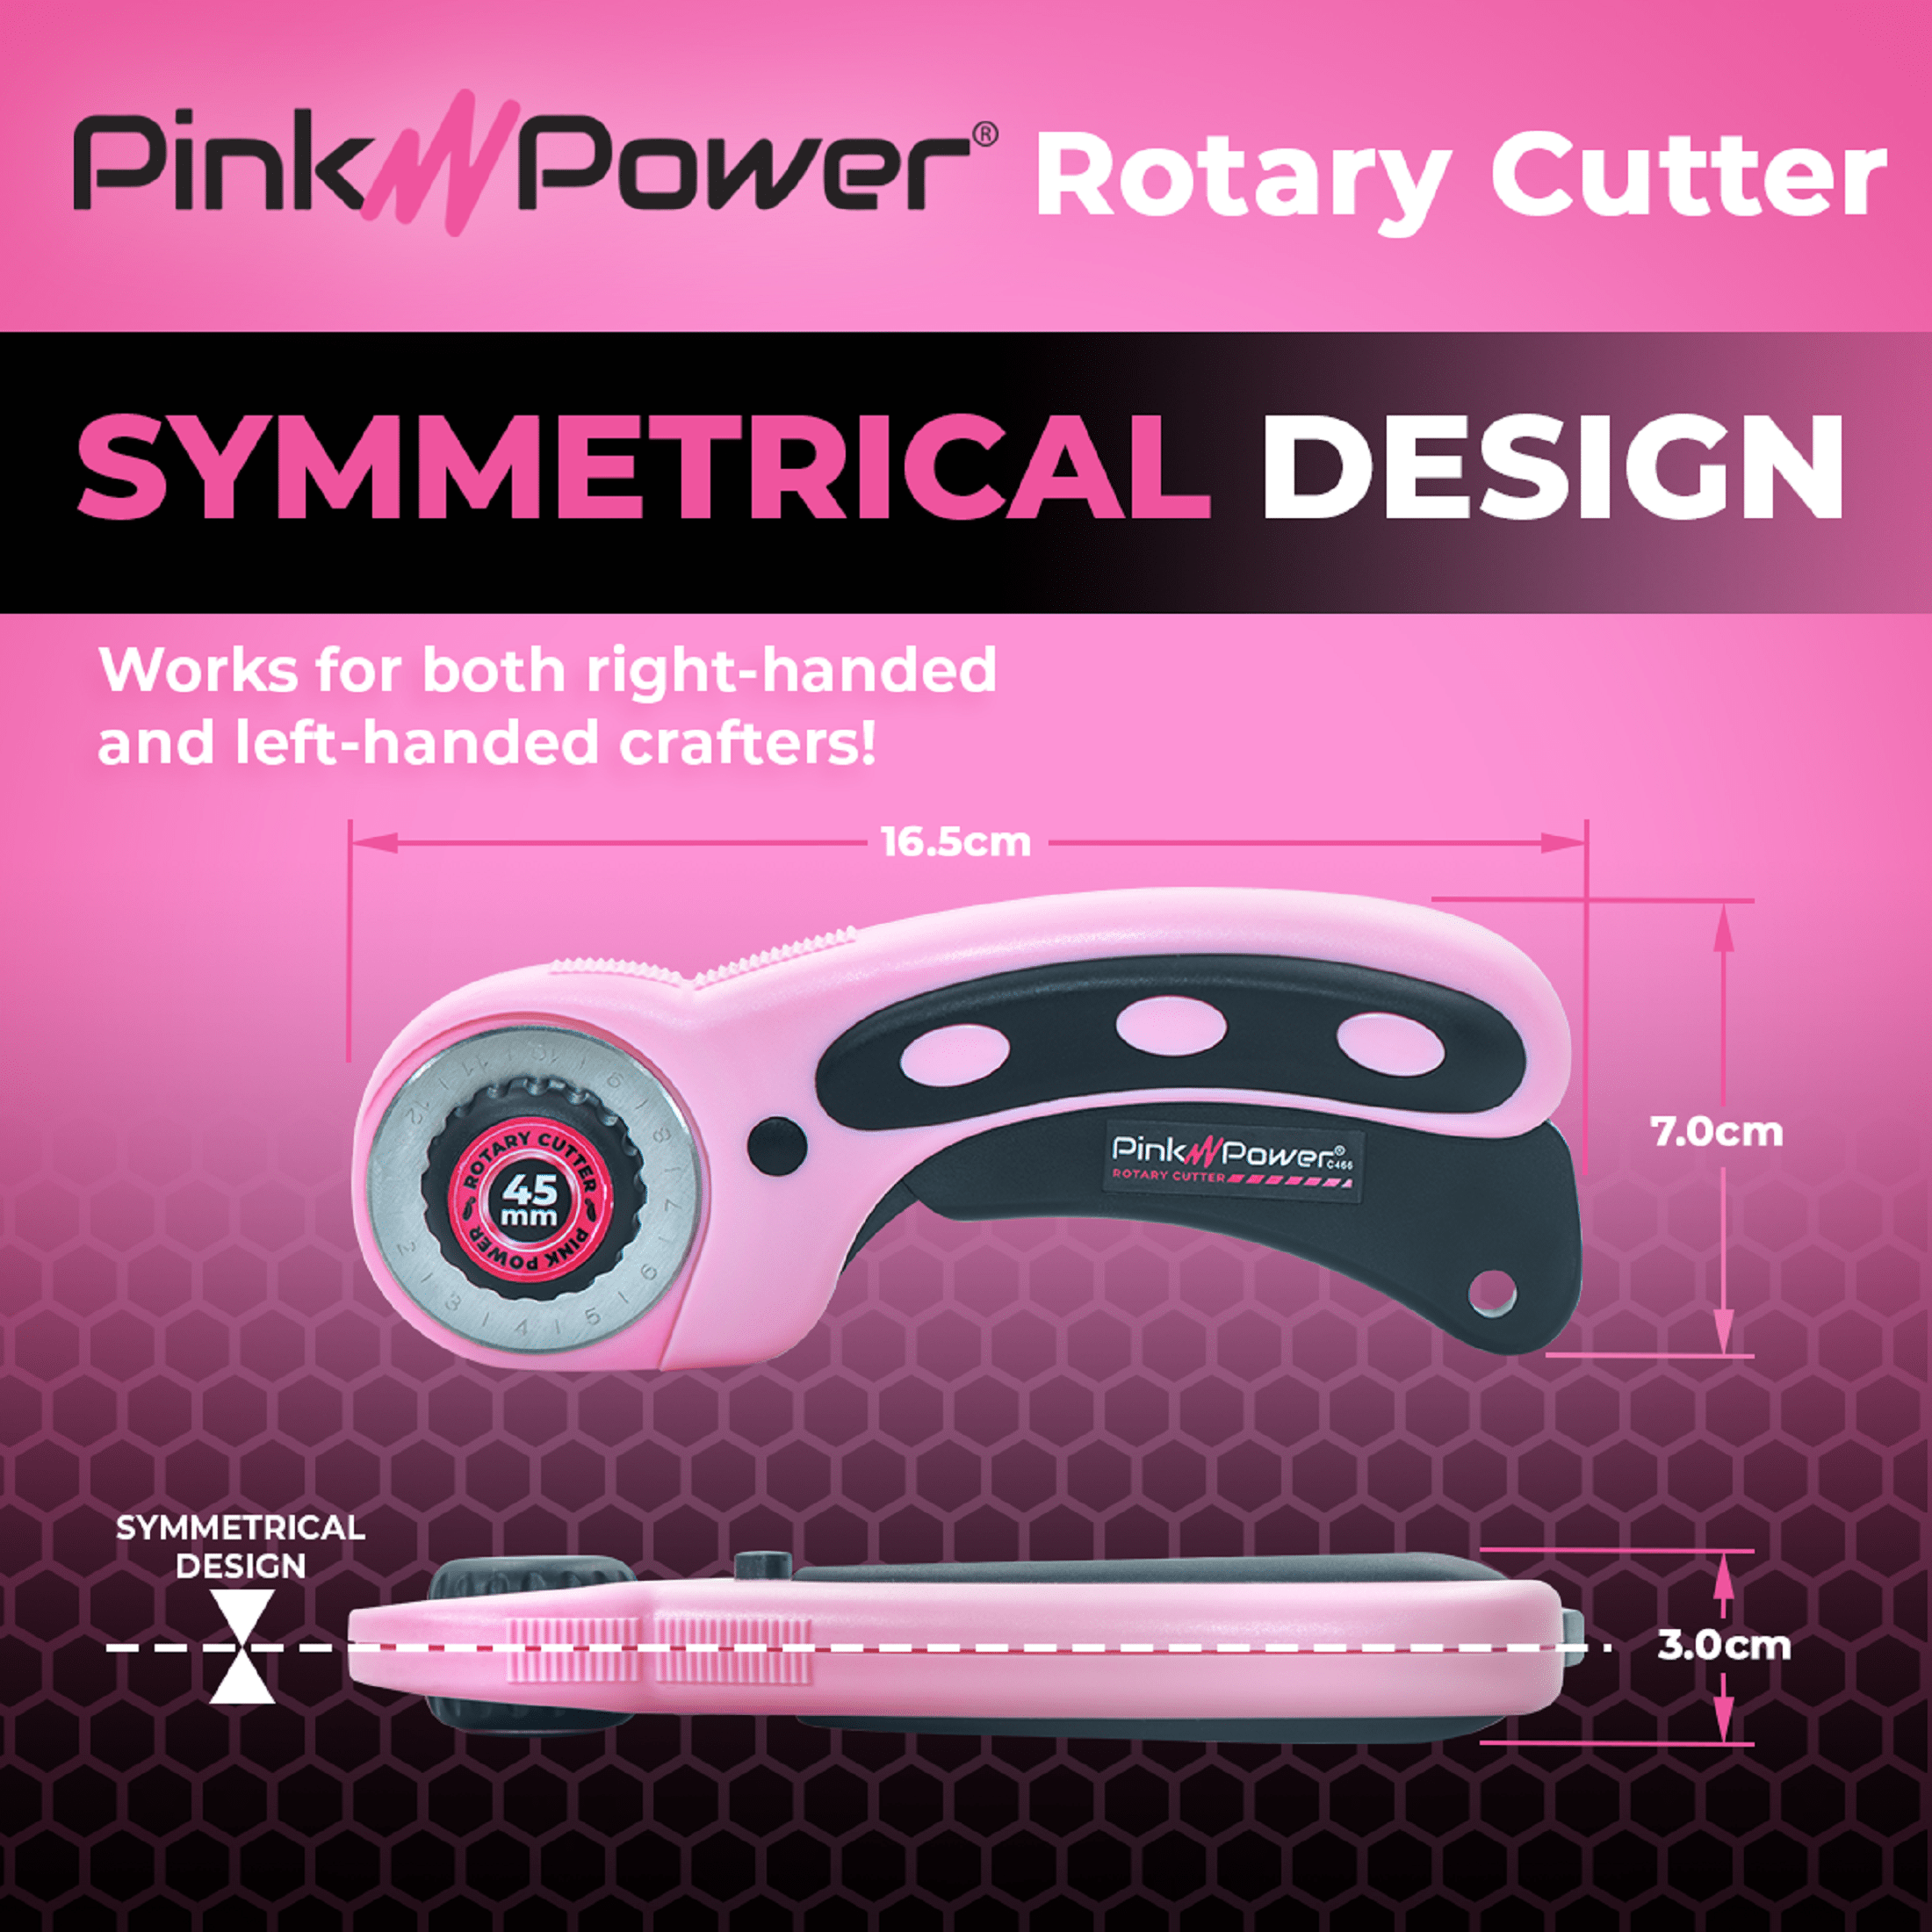 4-VOLT LITHIUM ION PINK CORDLESS FABRIC SCISSORS w/ ROTARY CUTTER Craft Item Pink Power 